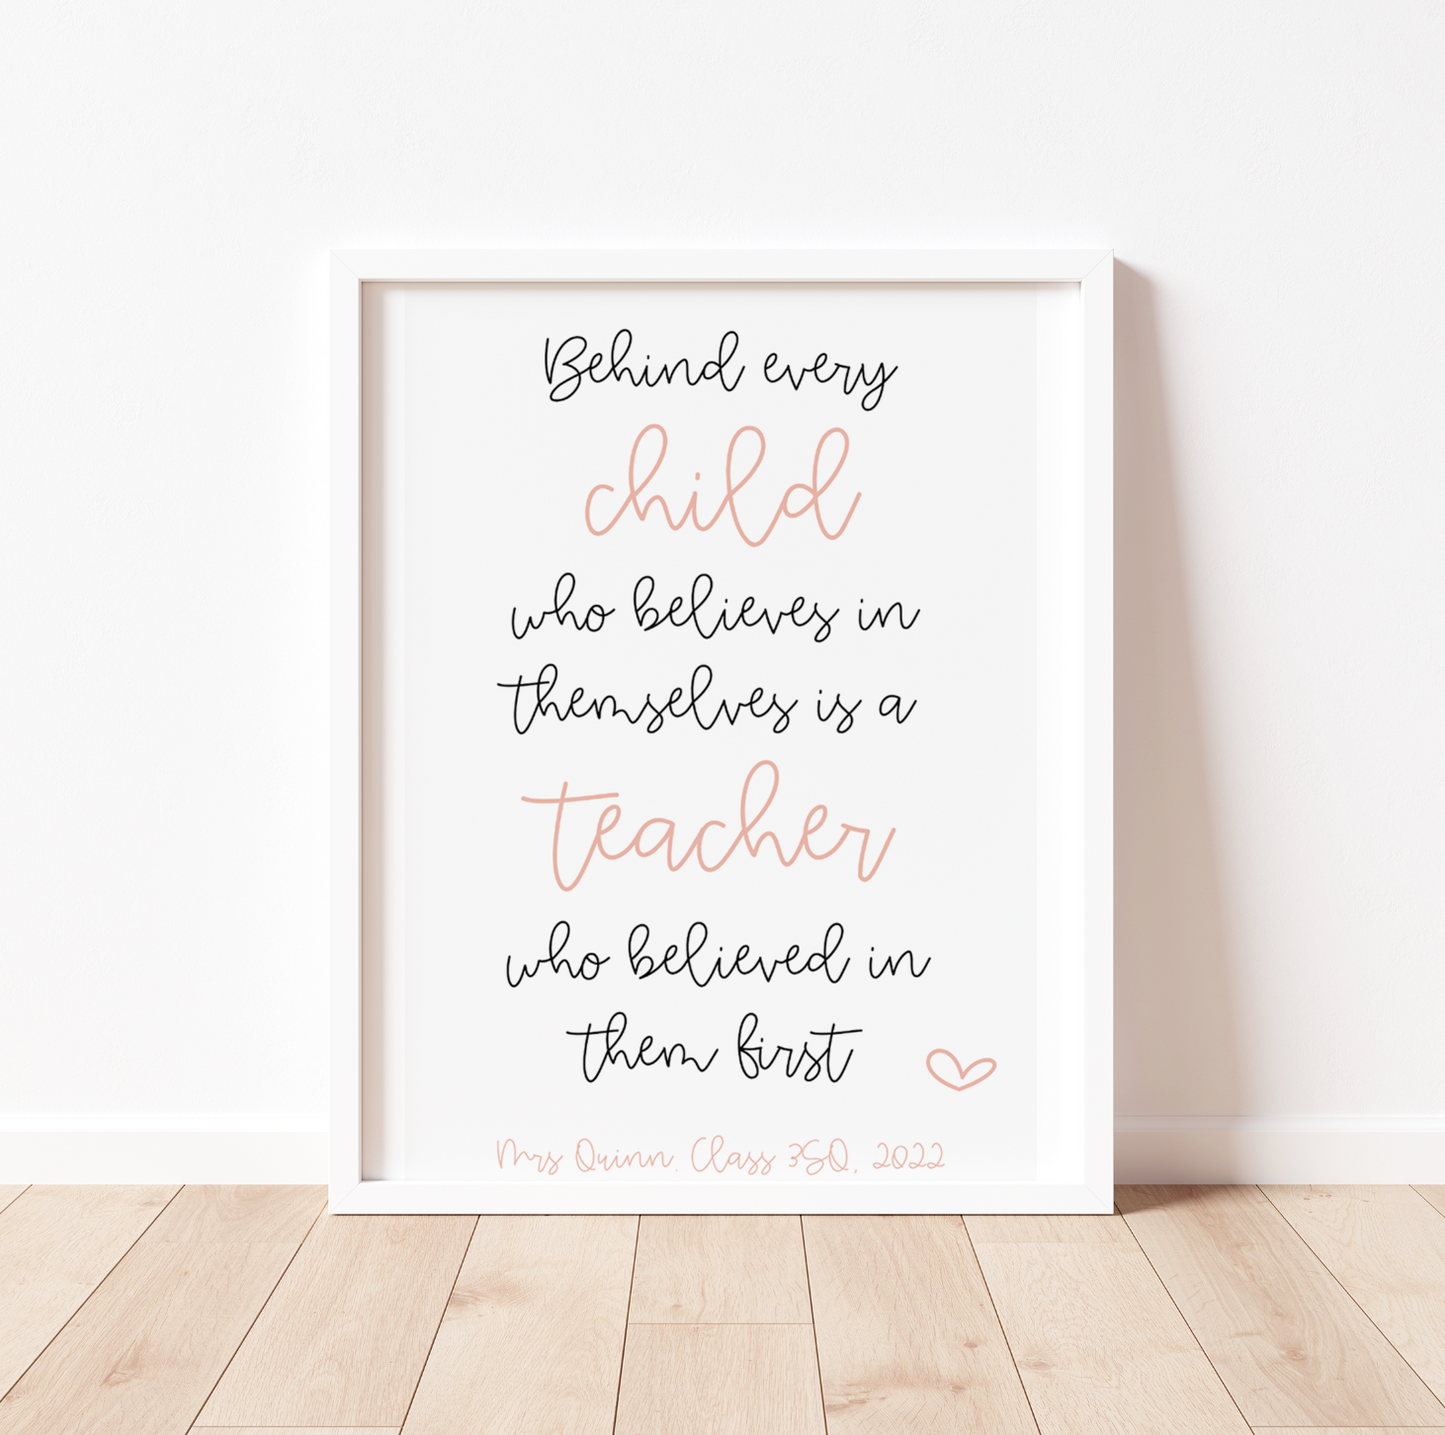 Behind Every Child who Believes in Themselves, is a Teacher who believed in them First Print